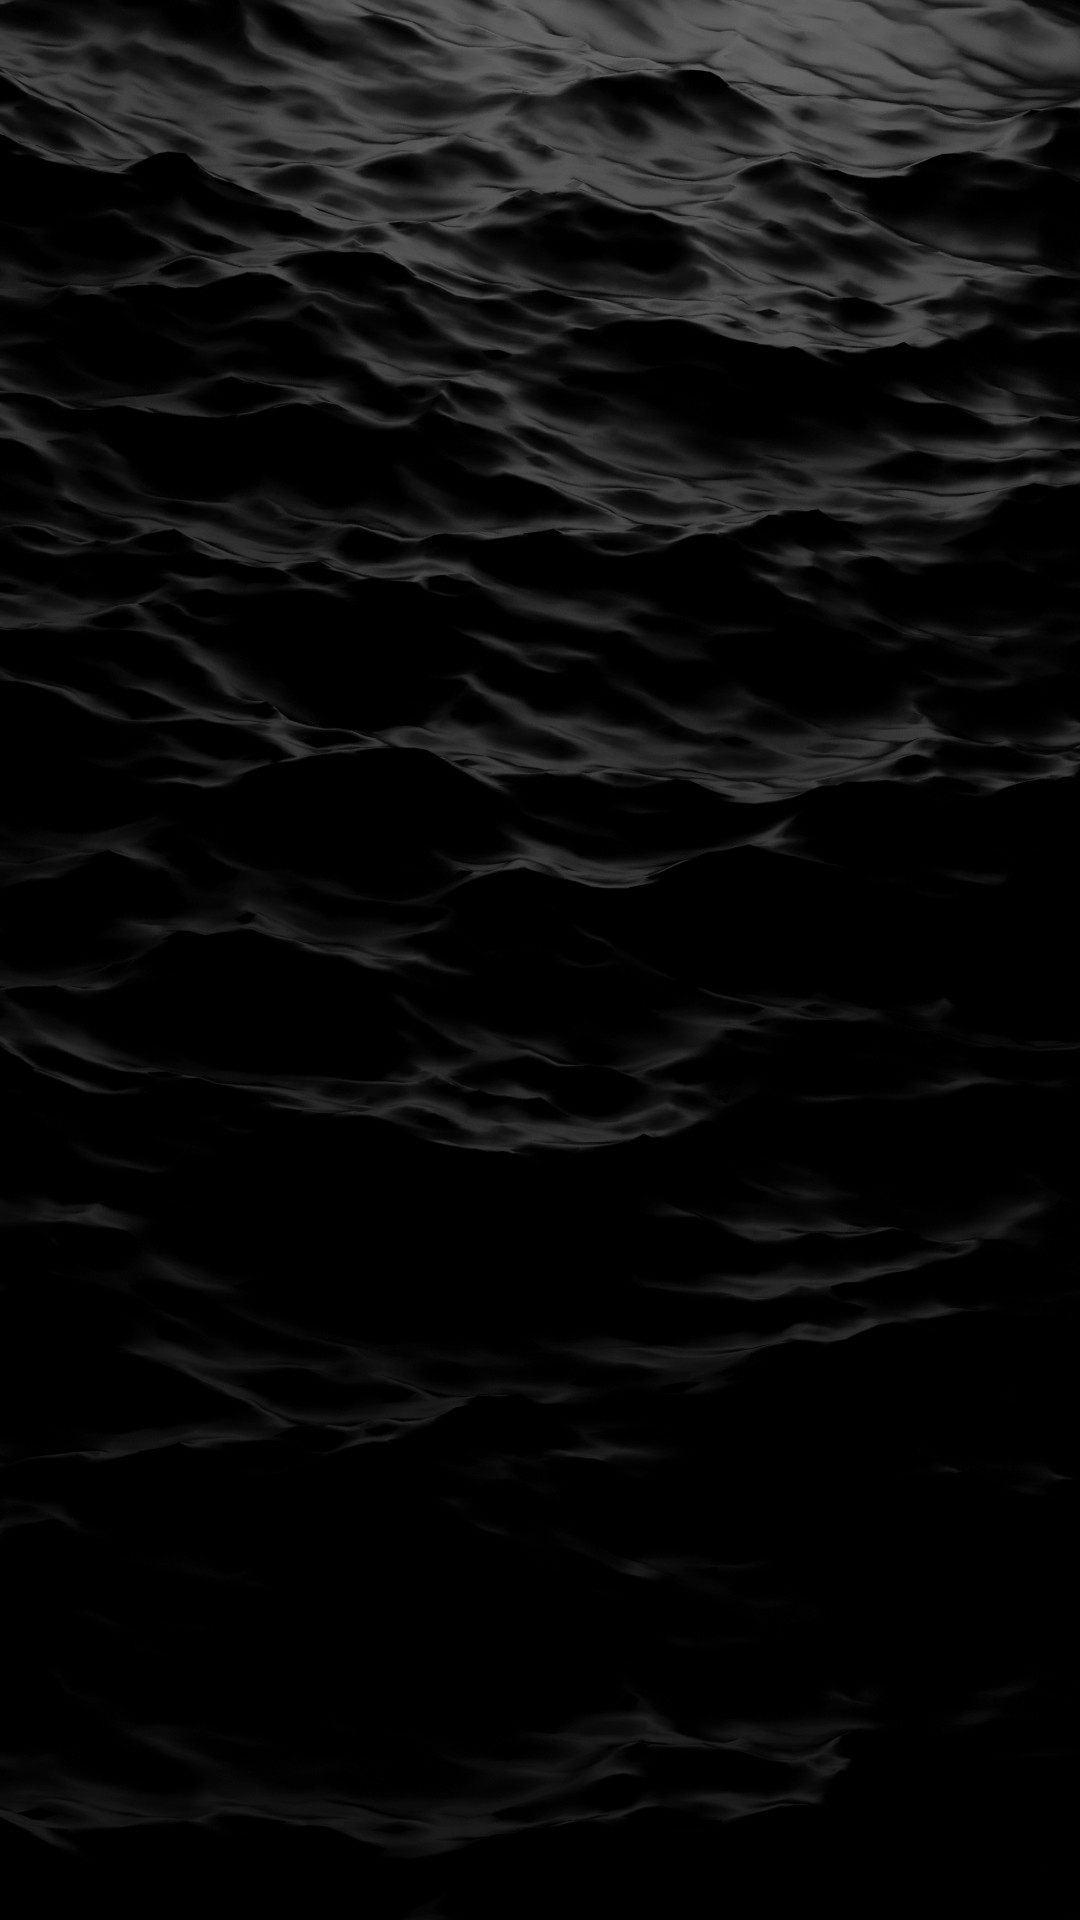 1080x1920 Picturesque Solid Black Iphone Wallpaper If You Have A Black Or Jet IPhone  7 Need These